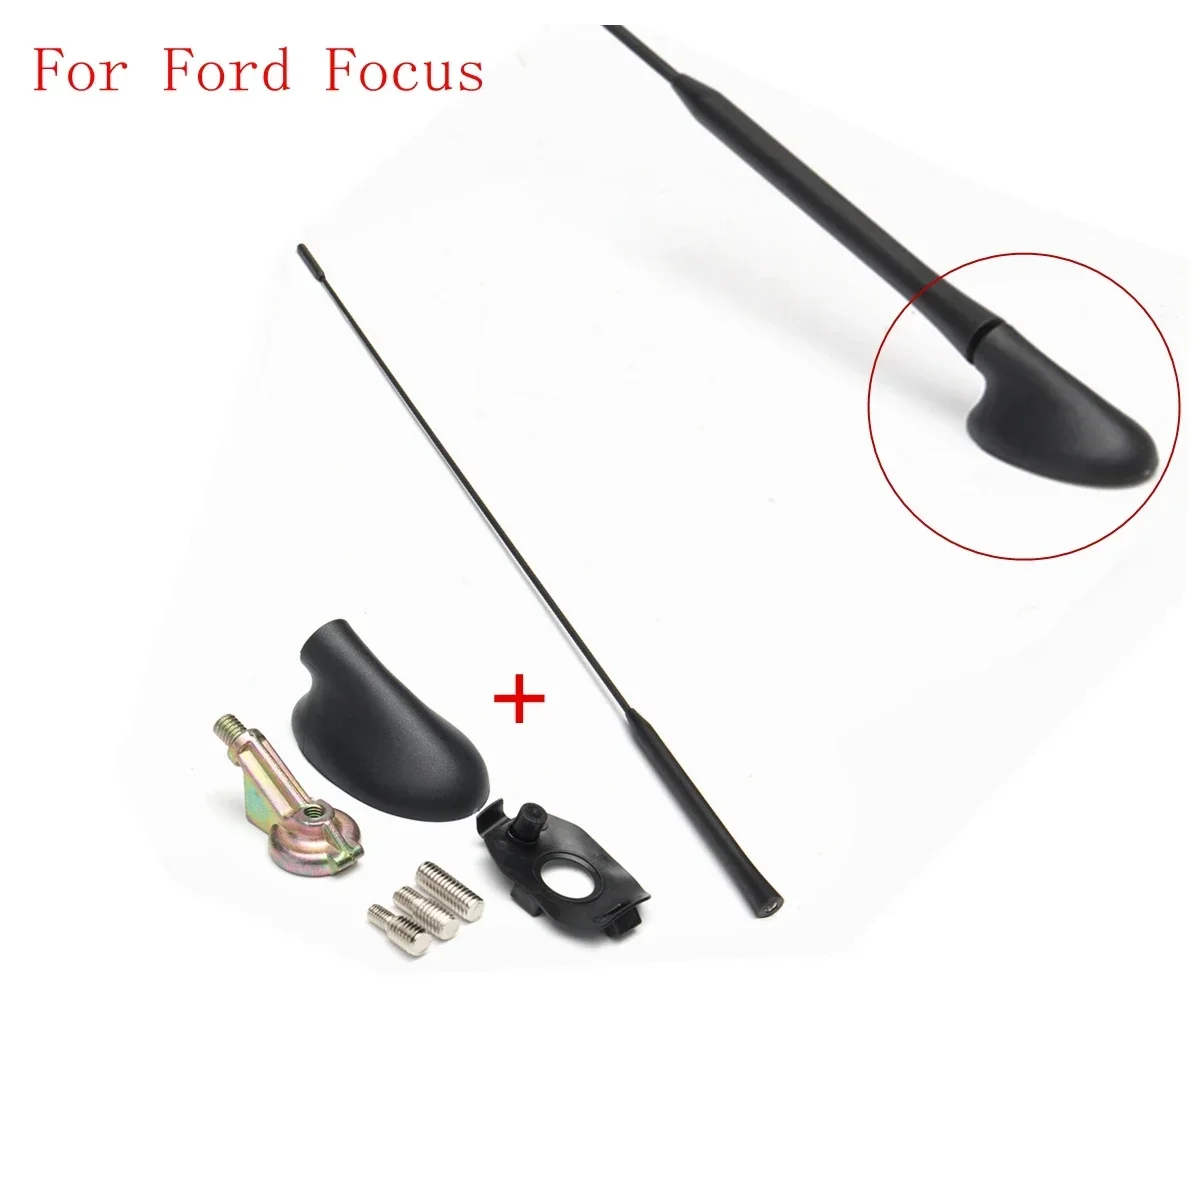 

New AM/FM Car Radio Roof Antenna Aerials Mast + Base Kit For Focus Models 2000-2007 XS8Z-18919-AA XS8Z18919AA For Ford